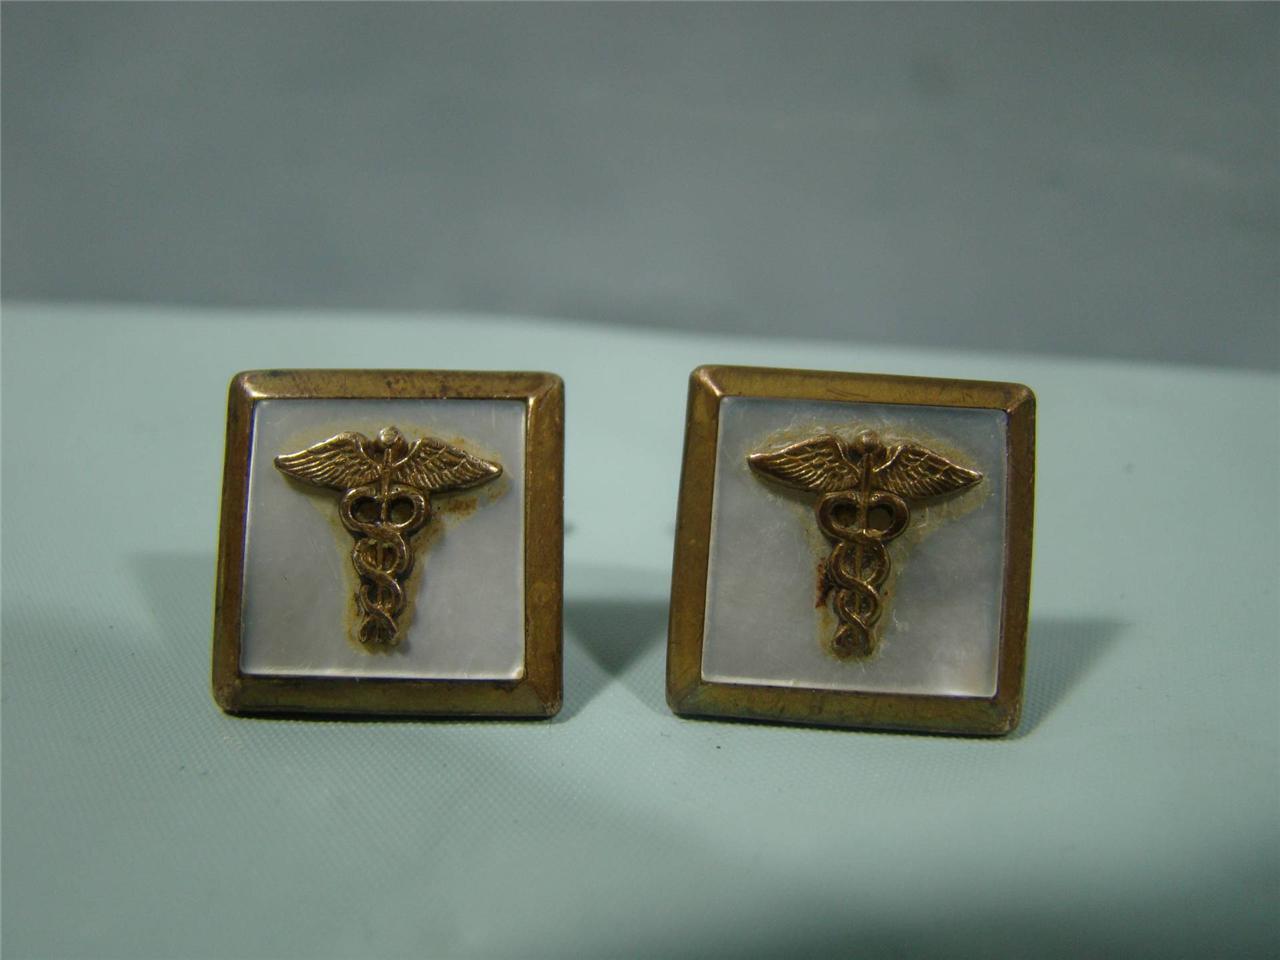 Pair of Vintage Medical Service Caduceus Gold Toned Mother of Pearl Cuff Links